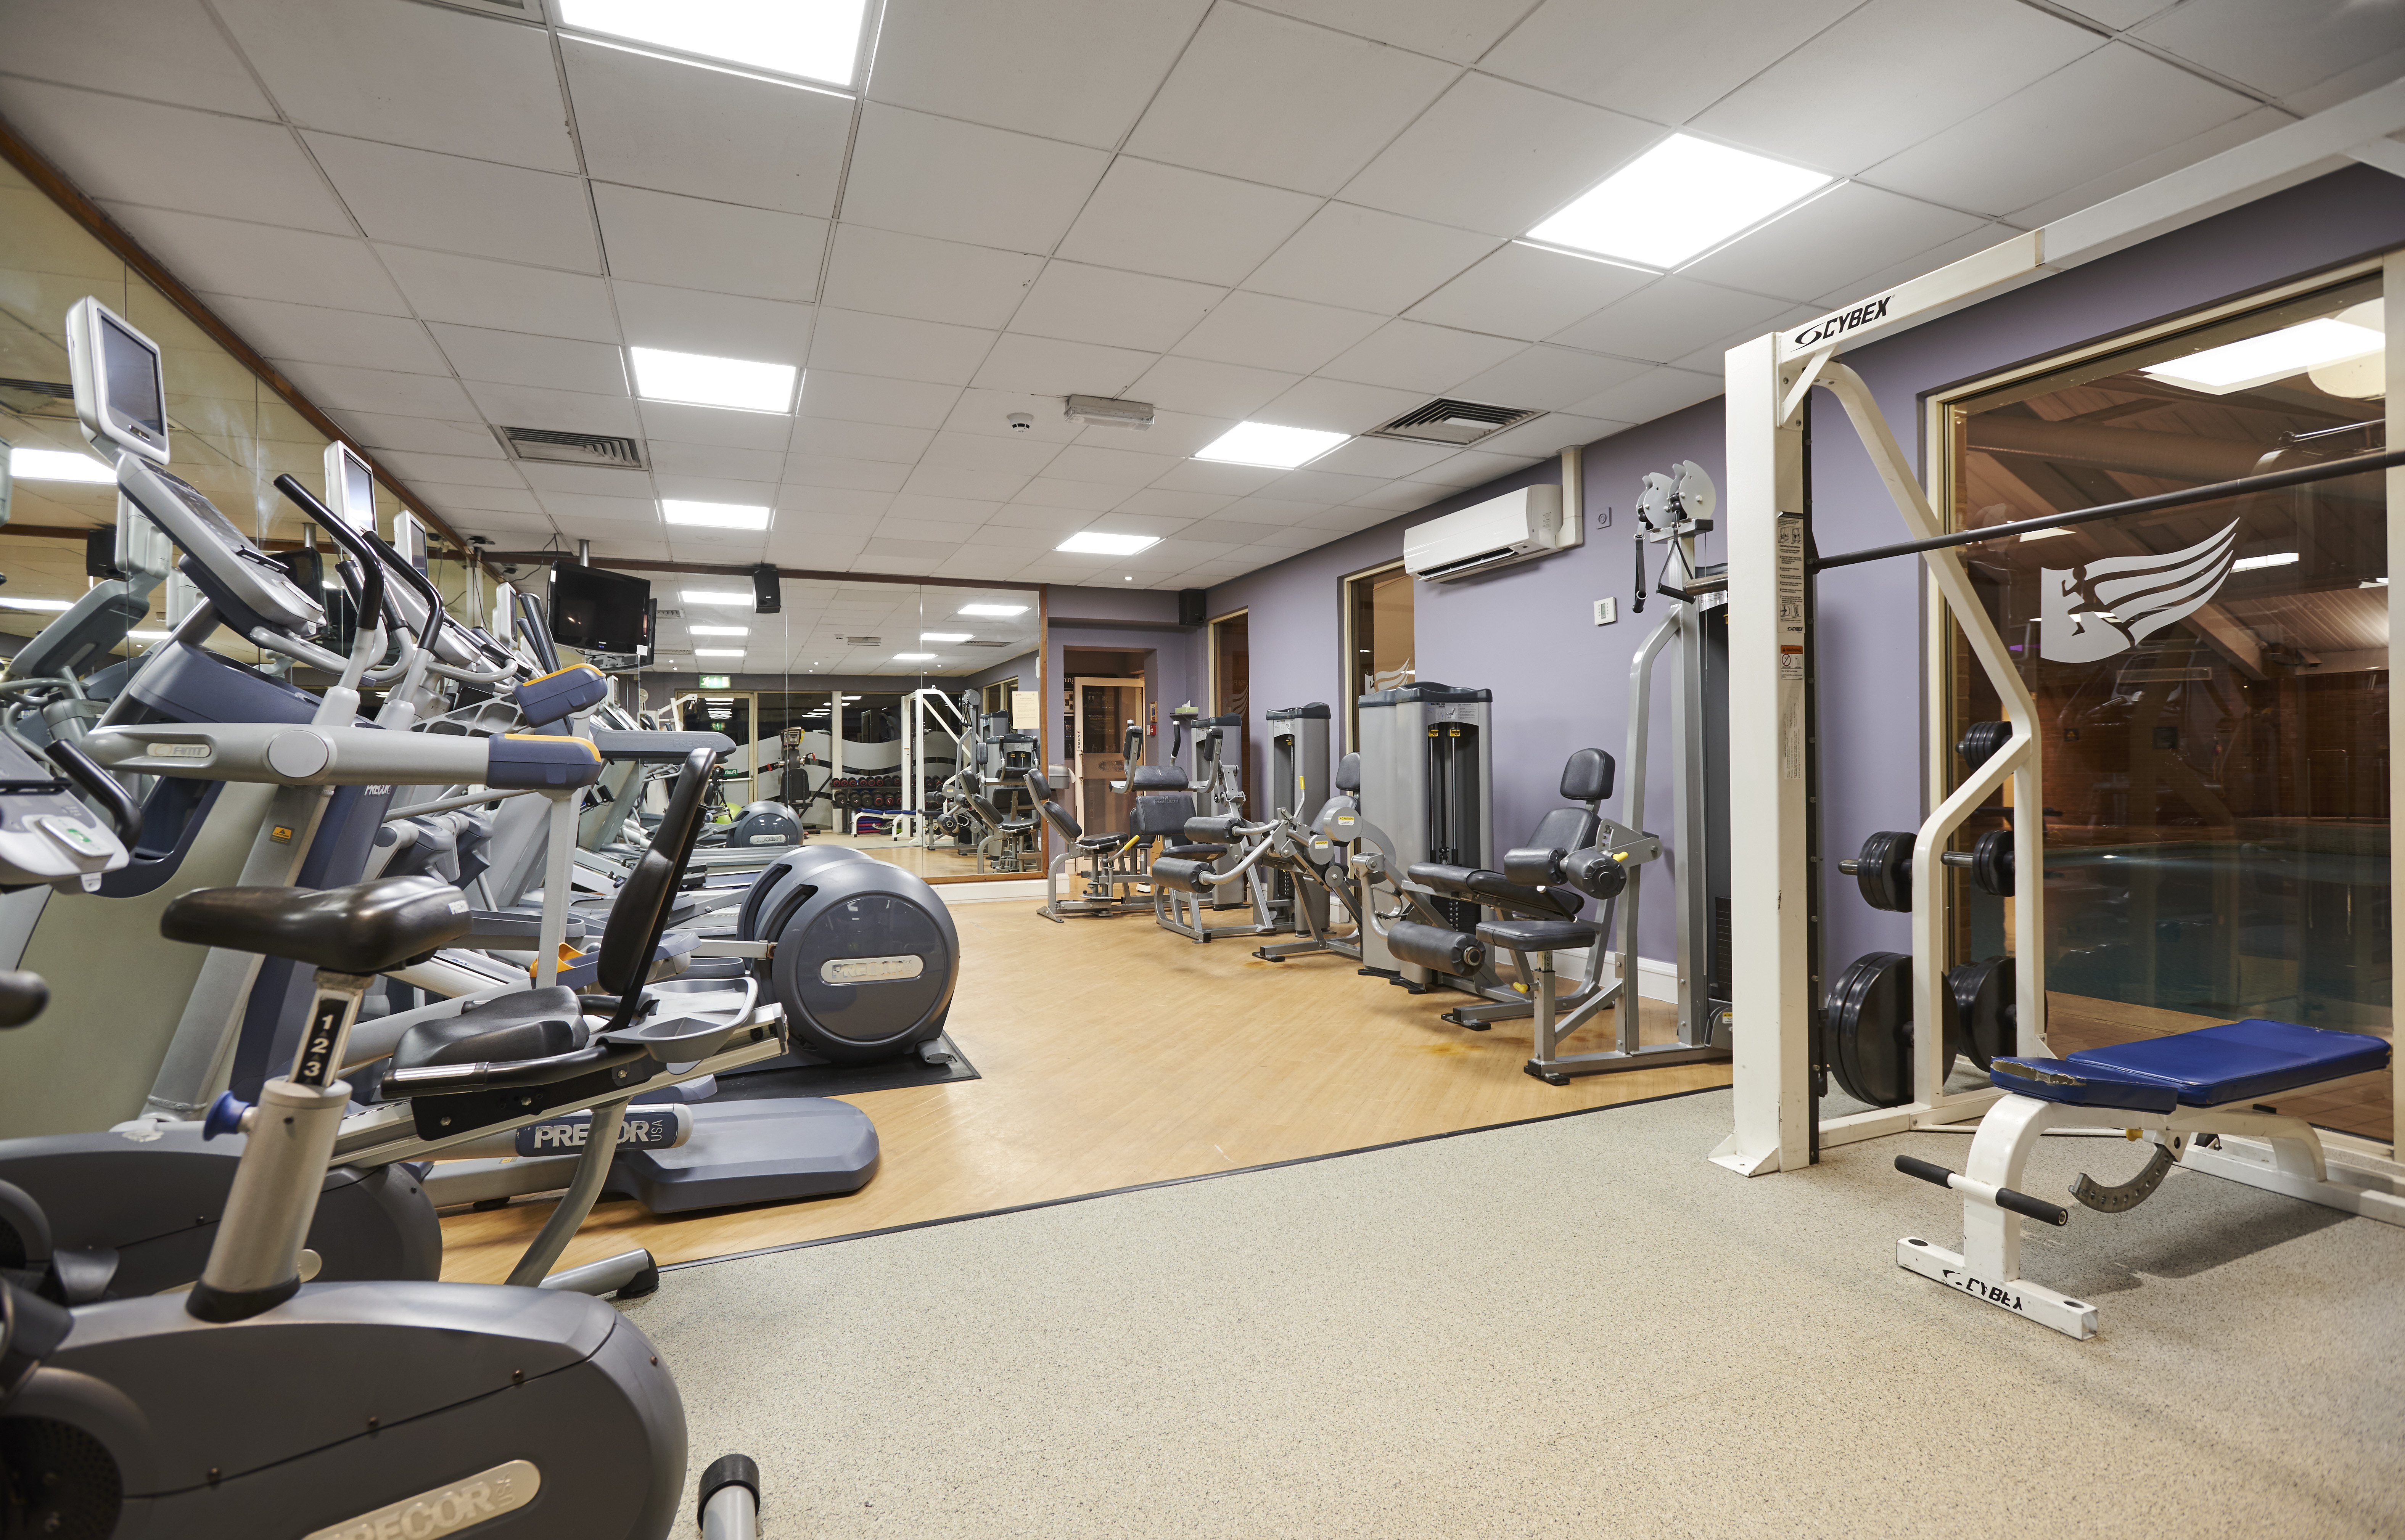 Cardio Equipment, Mirrored Wall, Entry, and Weight Bench in LivingWell Fitness Room